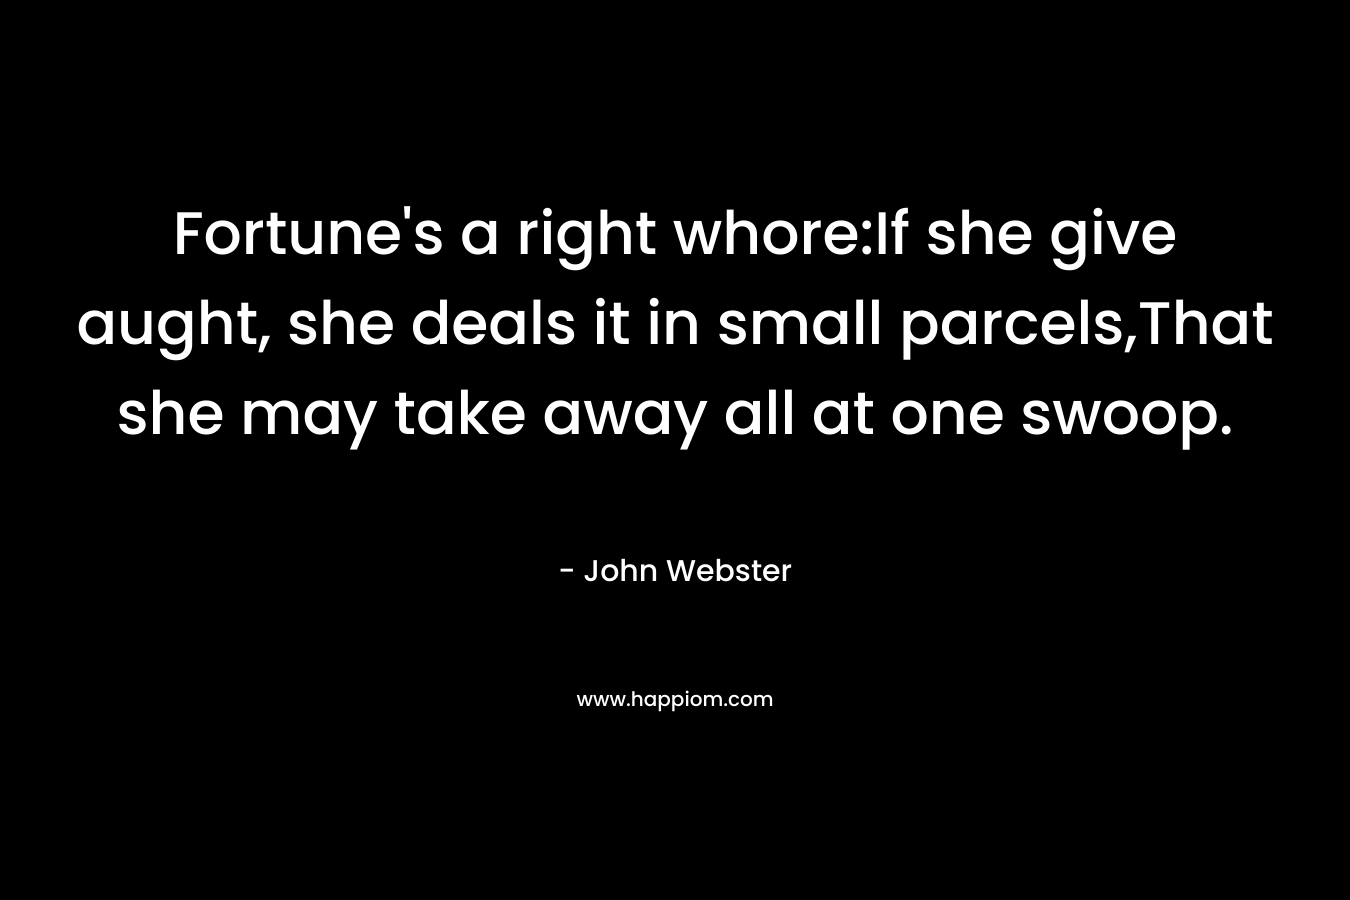 Fortune's a right whore:If she give aught, she deals it in small parcels,That she may take away all at one swoop.